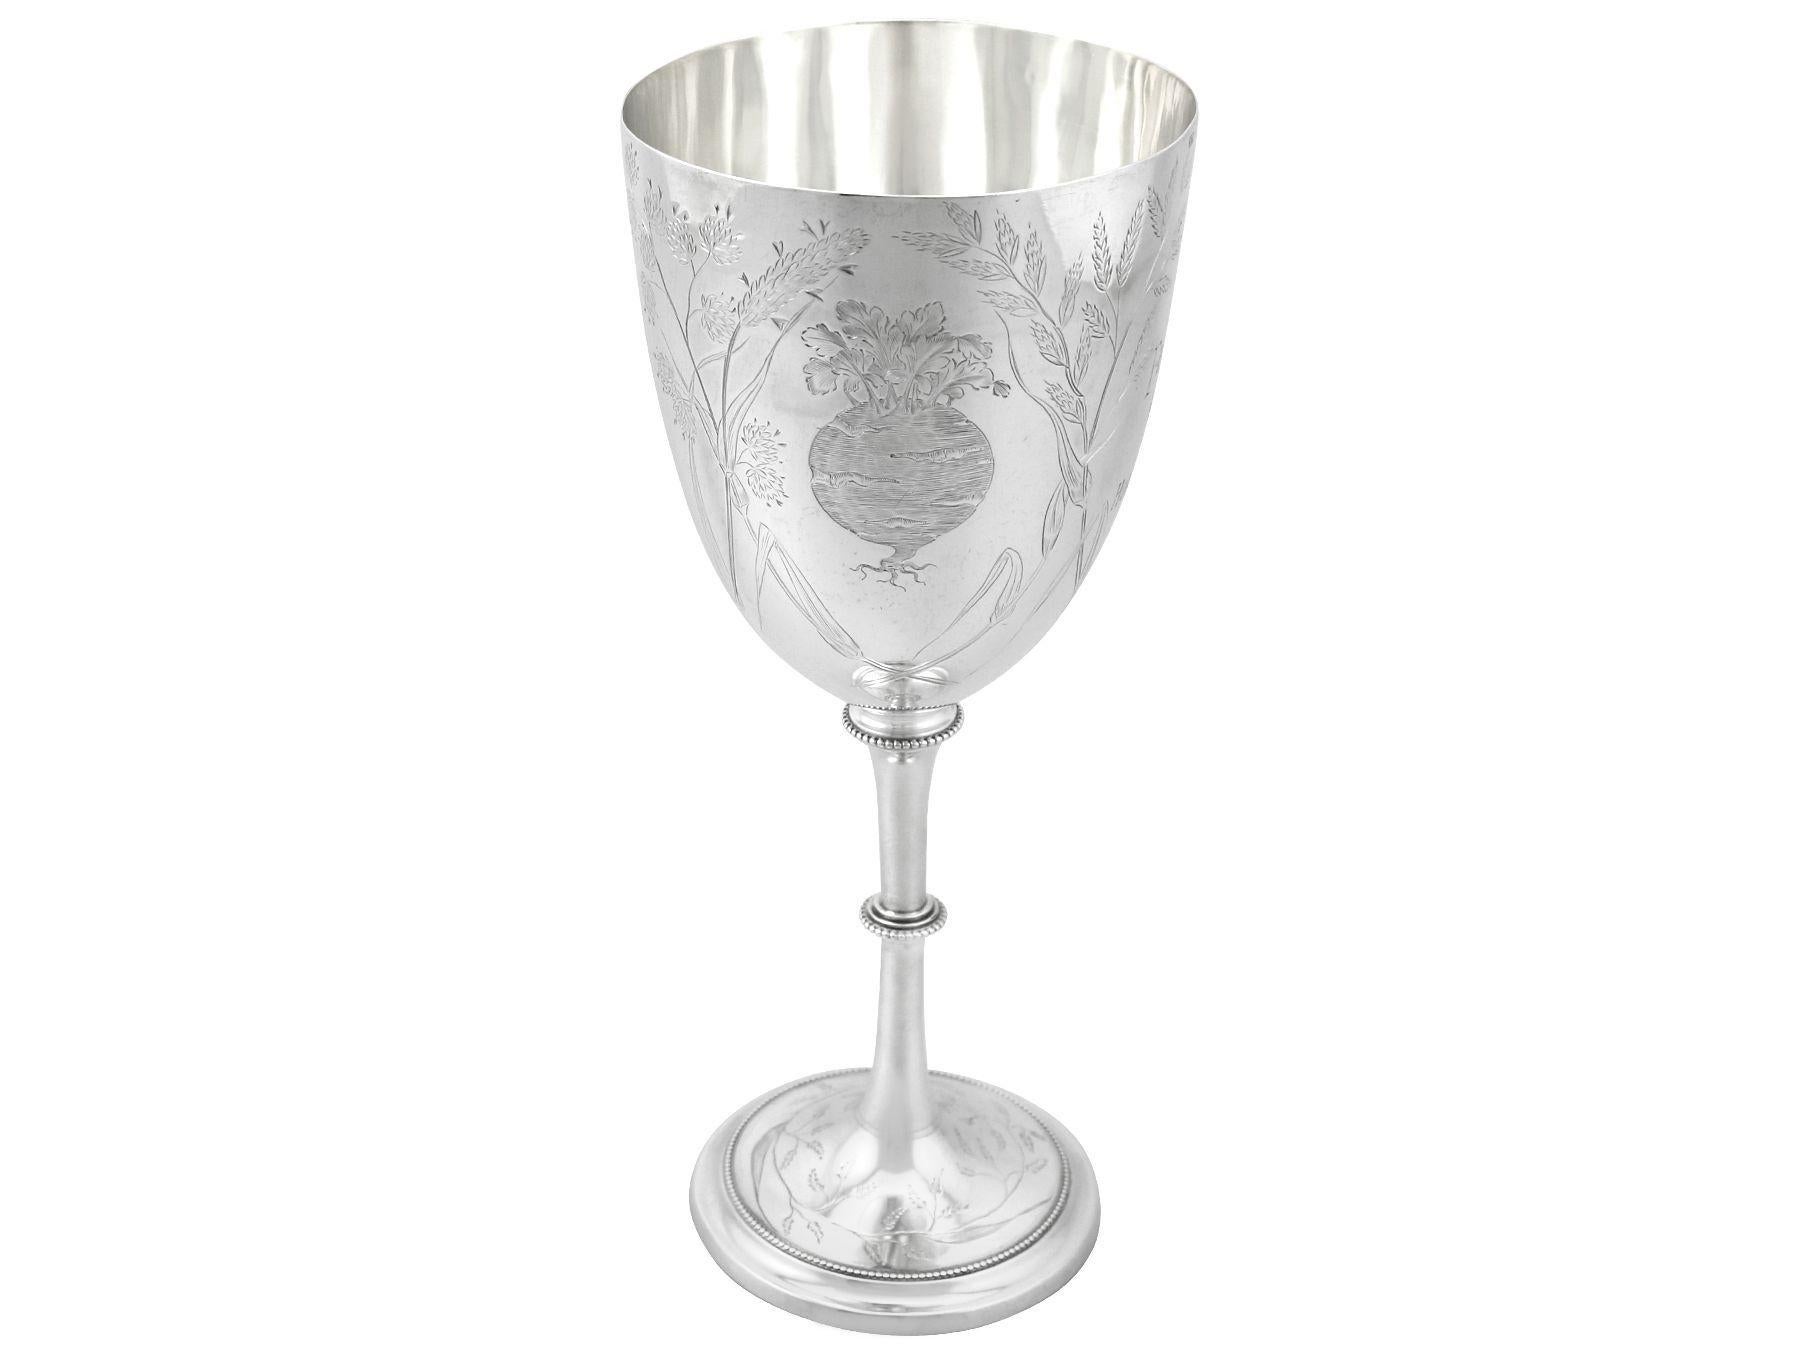 Victorian Sterling Silver Presentation Goblet / Cup In Excellent Condition For Sale In Jesmond, Newcastle Upon Tyne